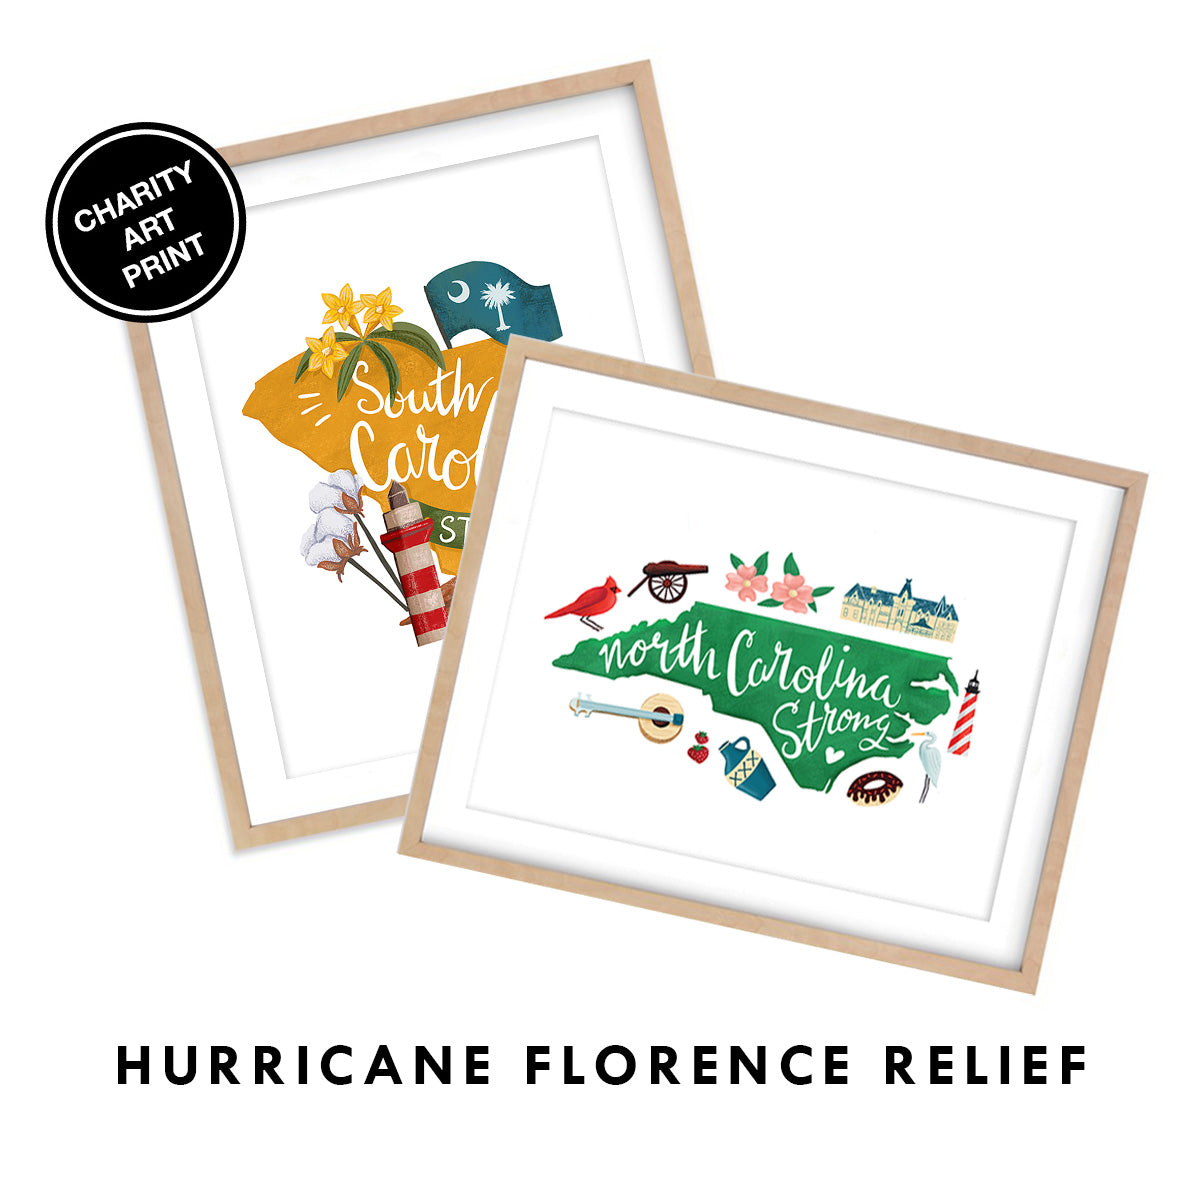 Hurricane Florence Relief - Charity Art Prints